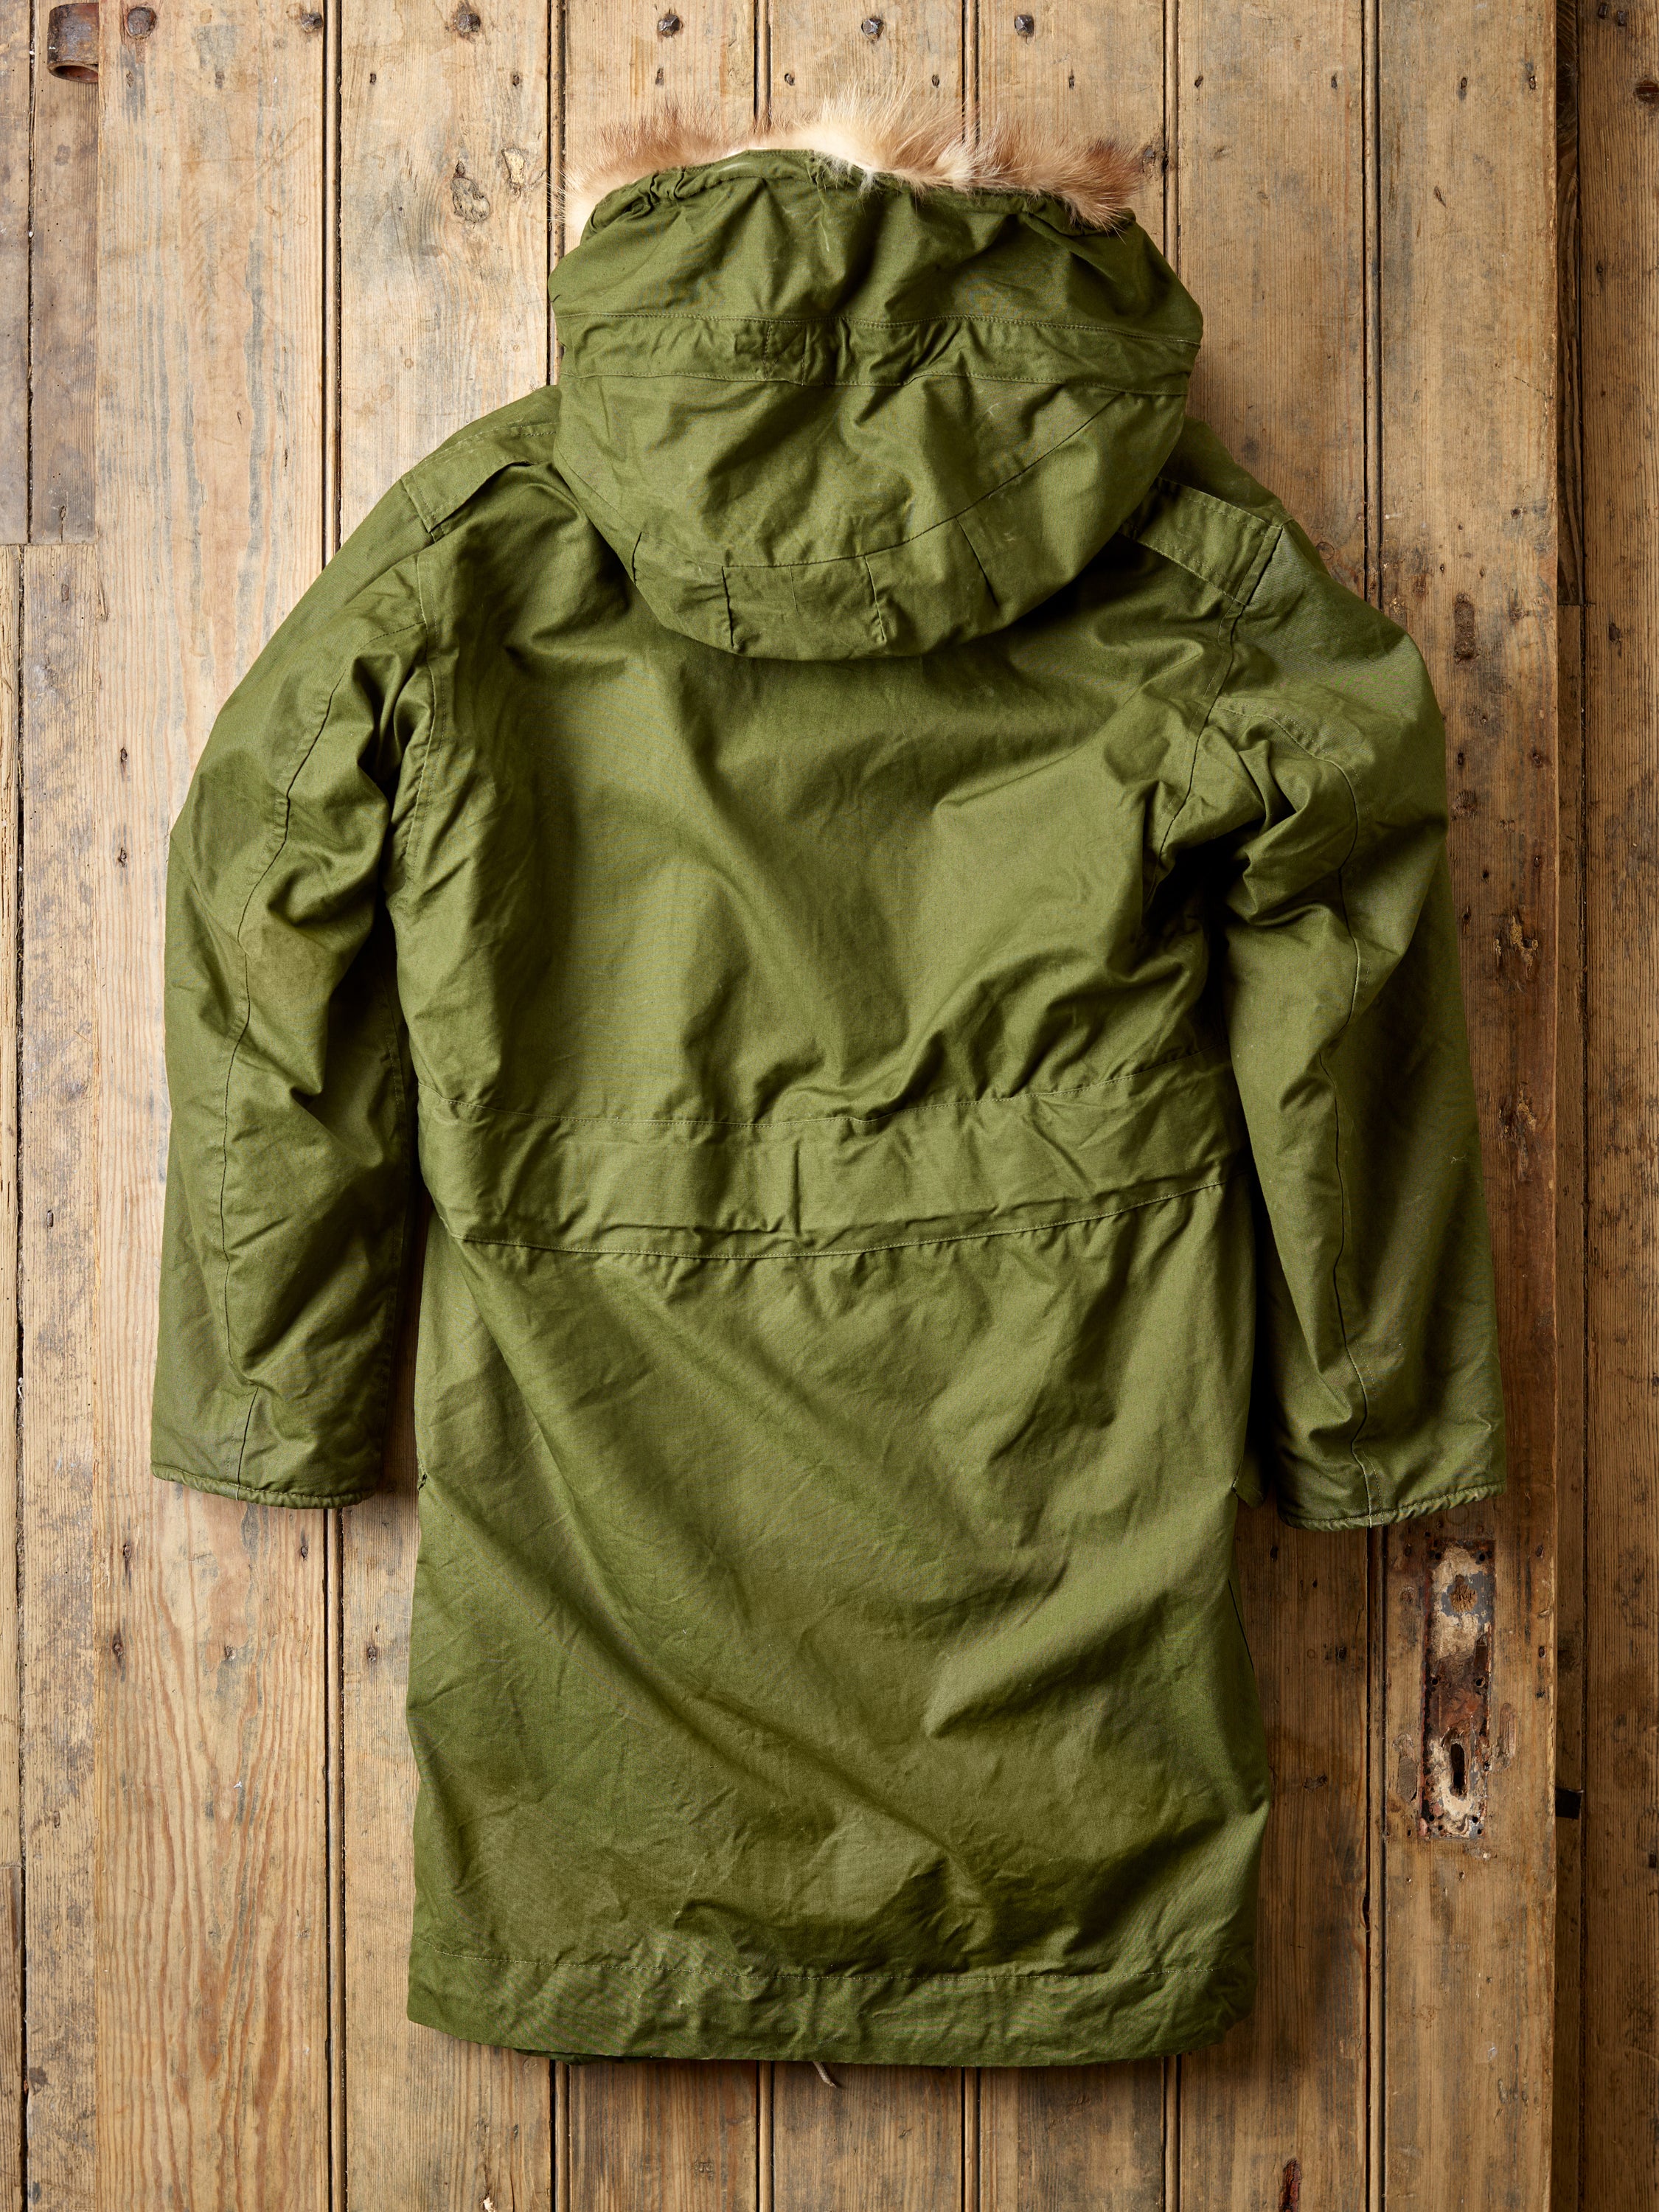 The Royal Air Force Cold Weather M1951 Parka